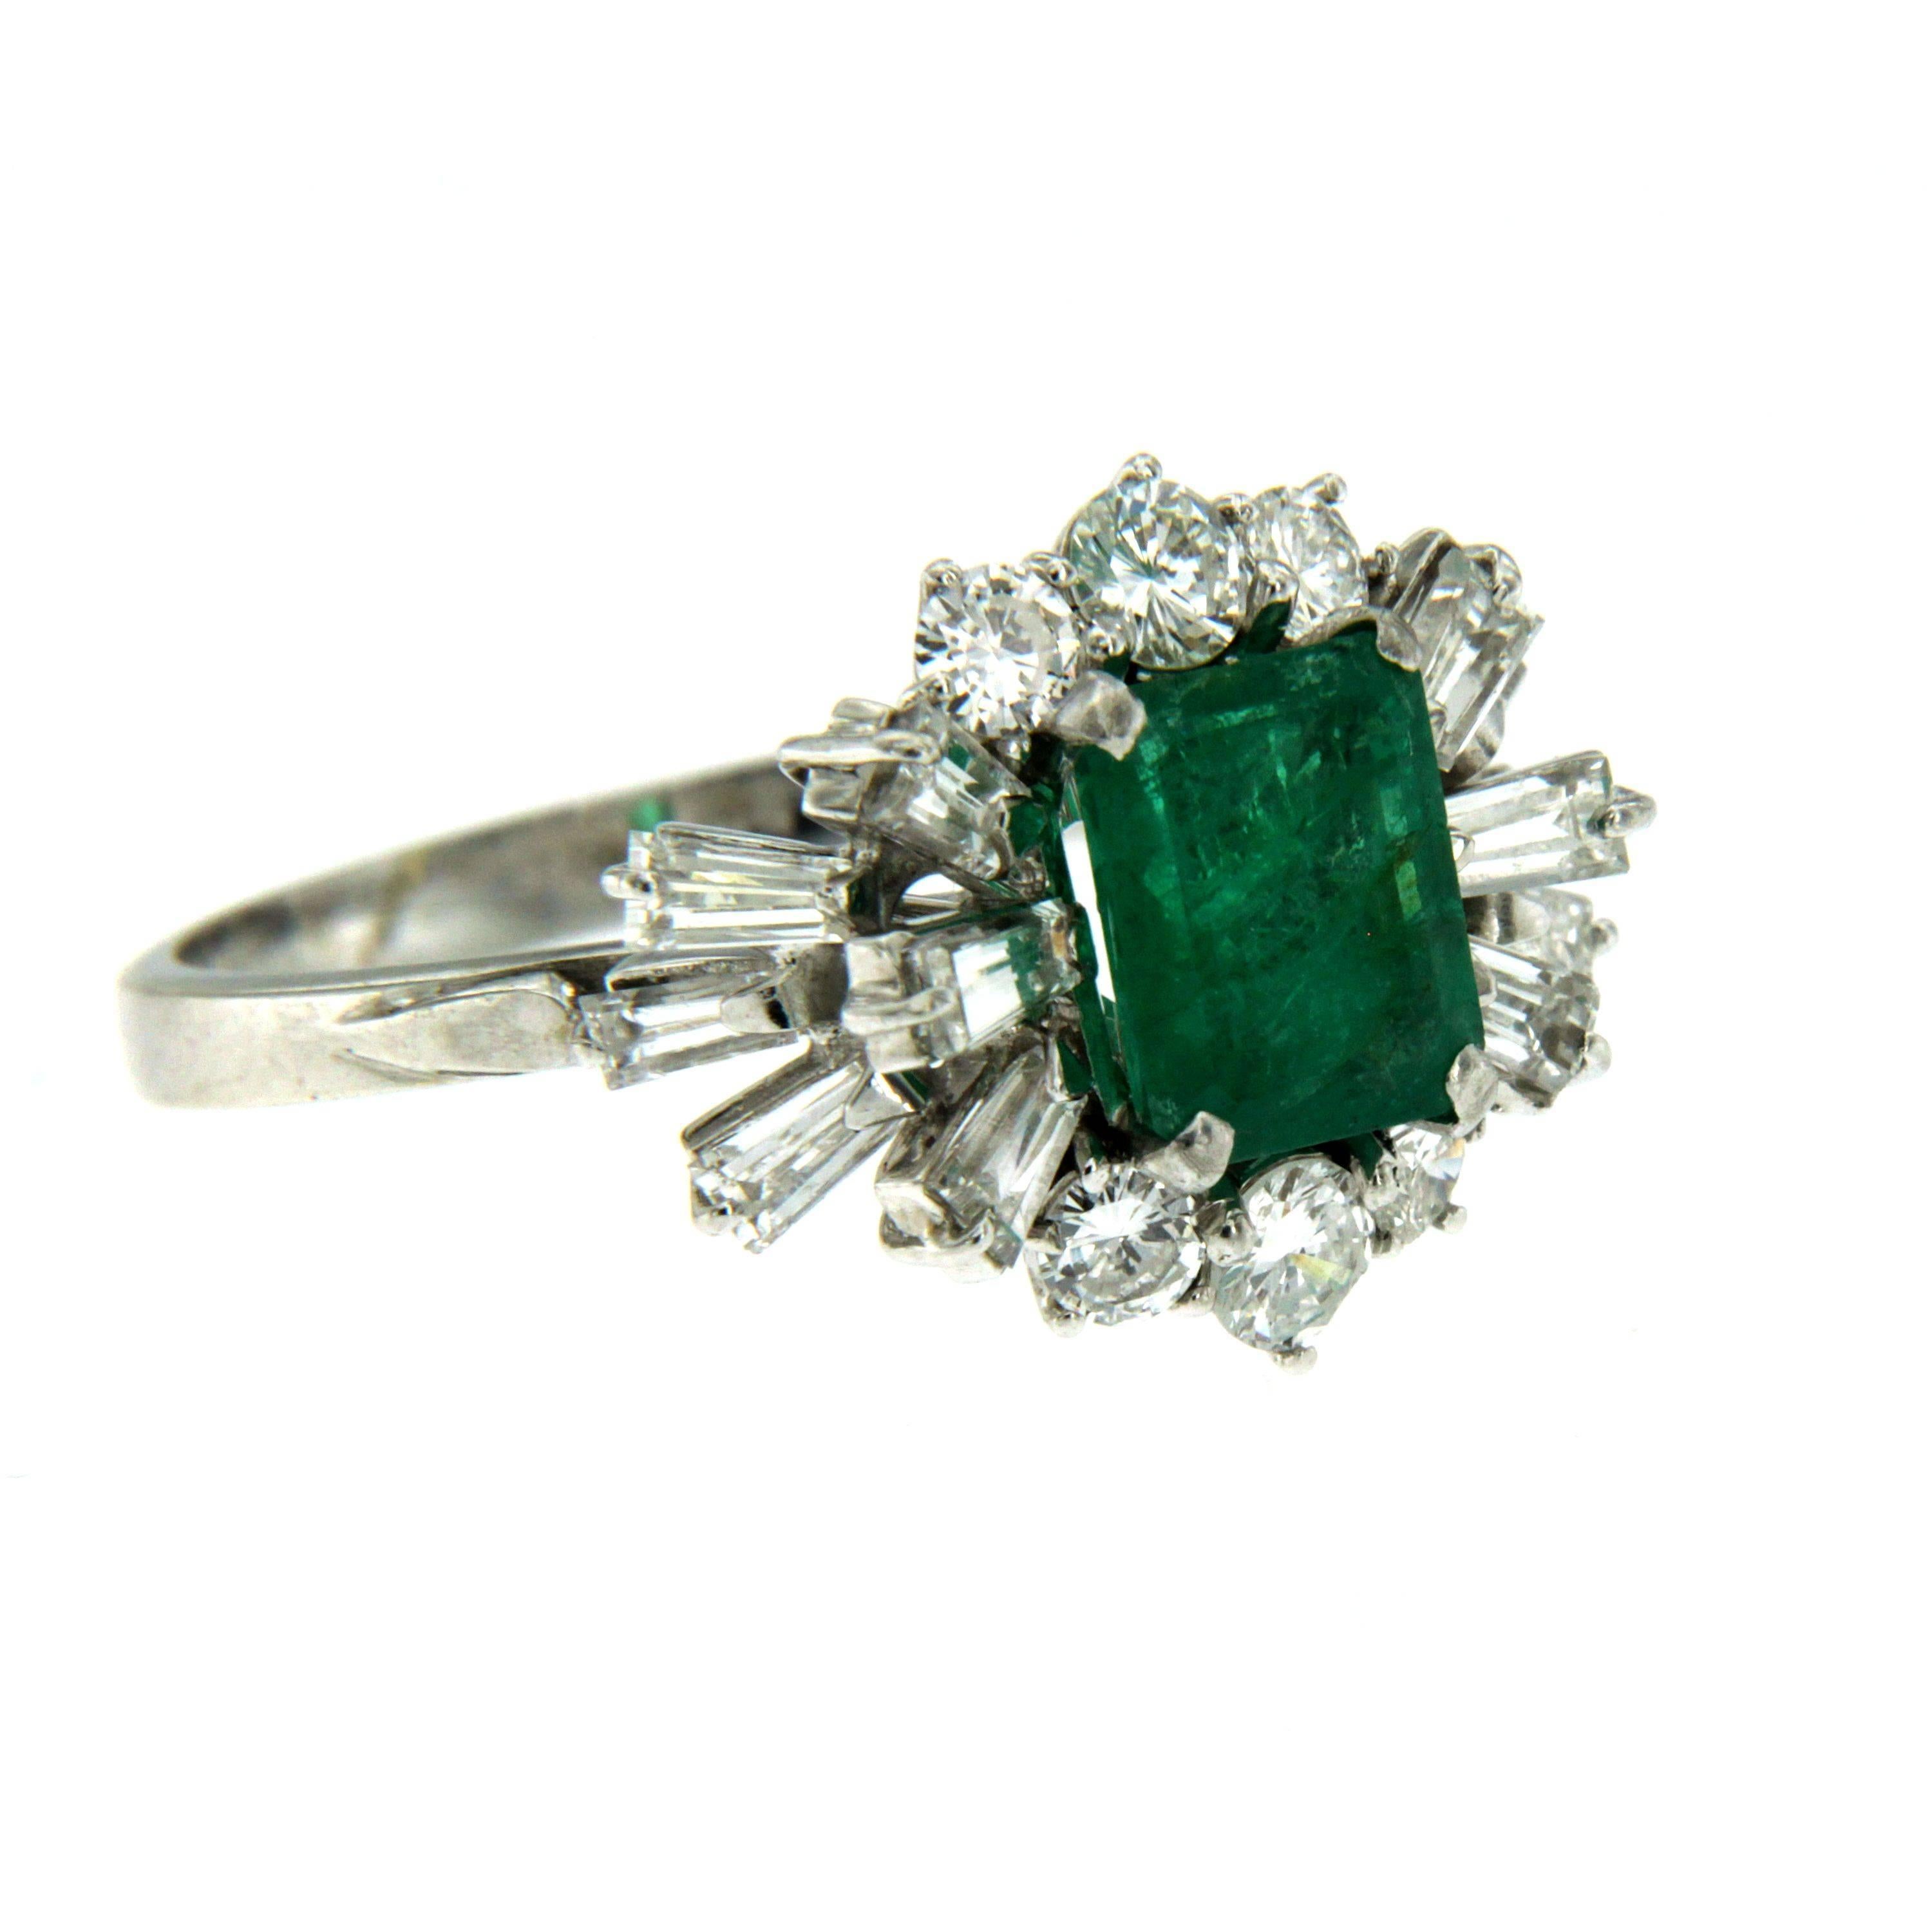 Fine and impressive engagement ring centering an emerald cut natural Colombian Emerald weighing 1.80 carat, flanked by 1.50 carats of baguette and round brilliant cut diamonds G color VVS. All set in 18K white gold.

CONDITION: Pre-owned -